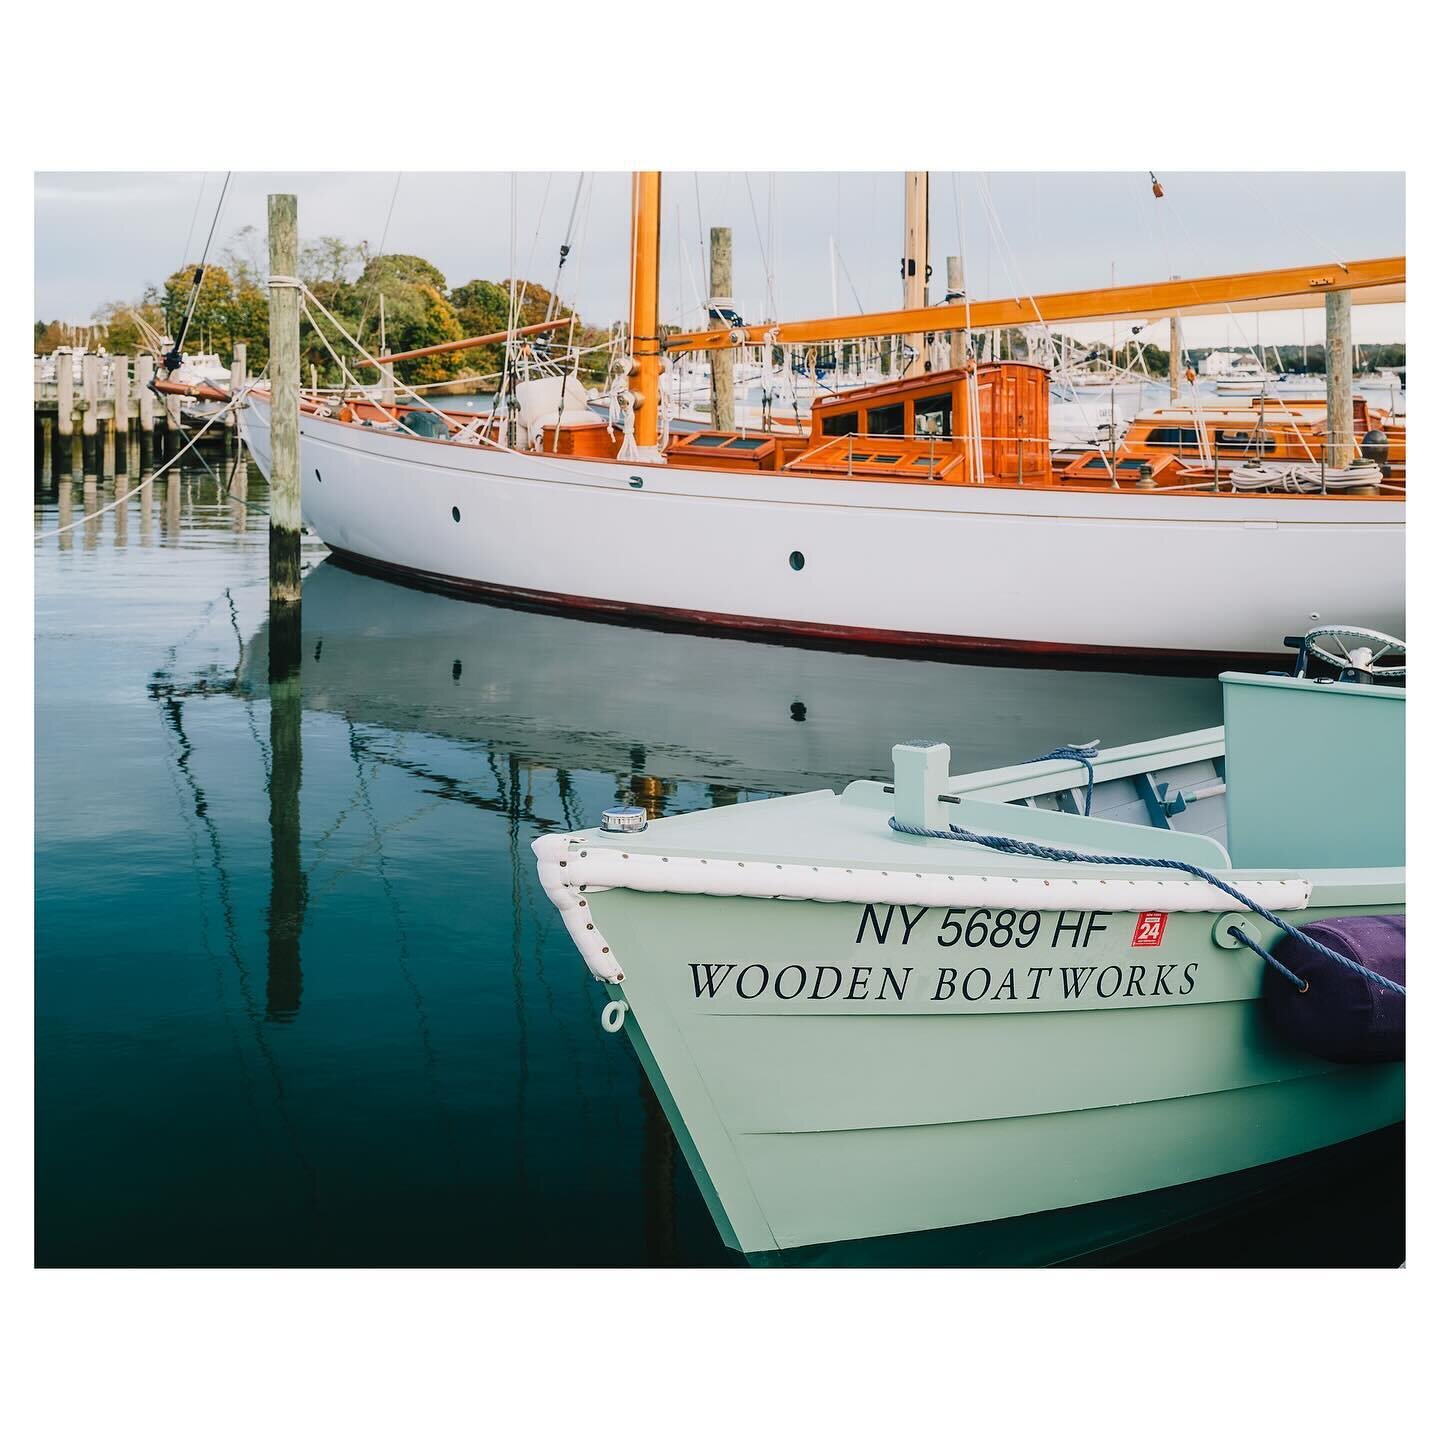 One of my favorite businesses on the North Fork is @woodenboatworks  When I'm not sure what to shoot, I like swinging by @townsend_manor_inn or @stonybrookelih to see what boats are being worked on. They do amazing work and treat these boats like the